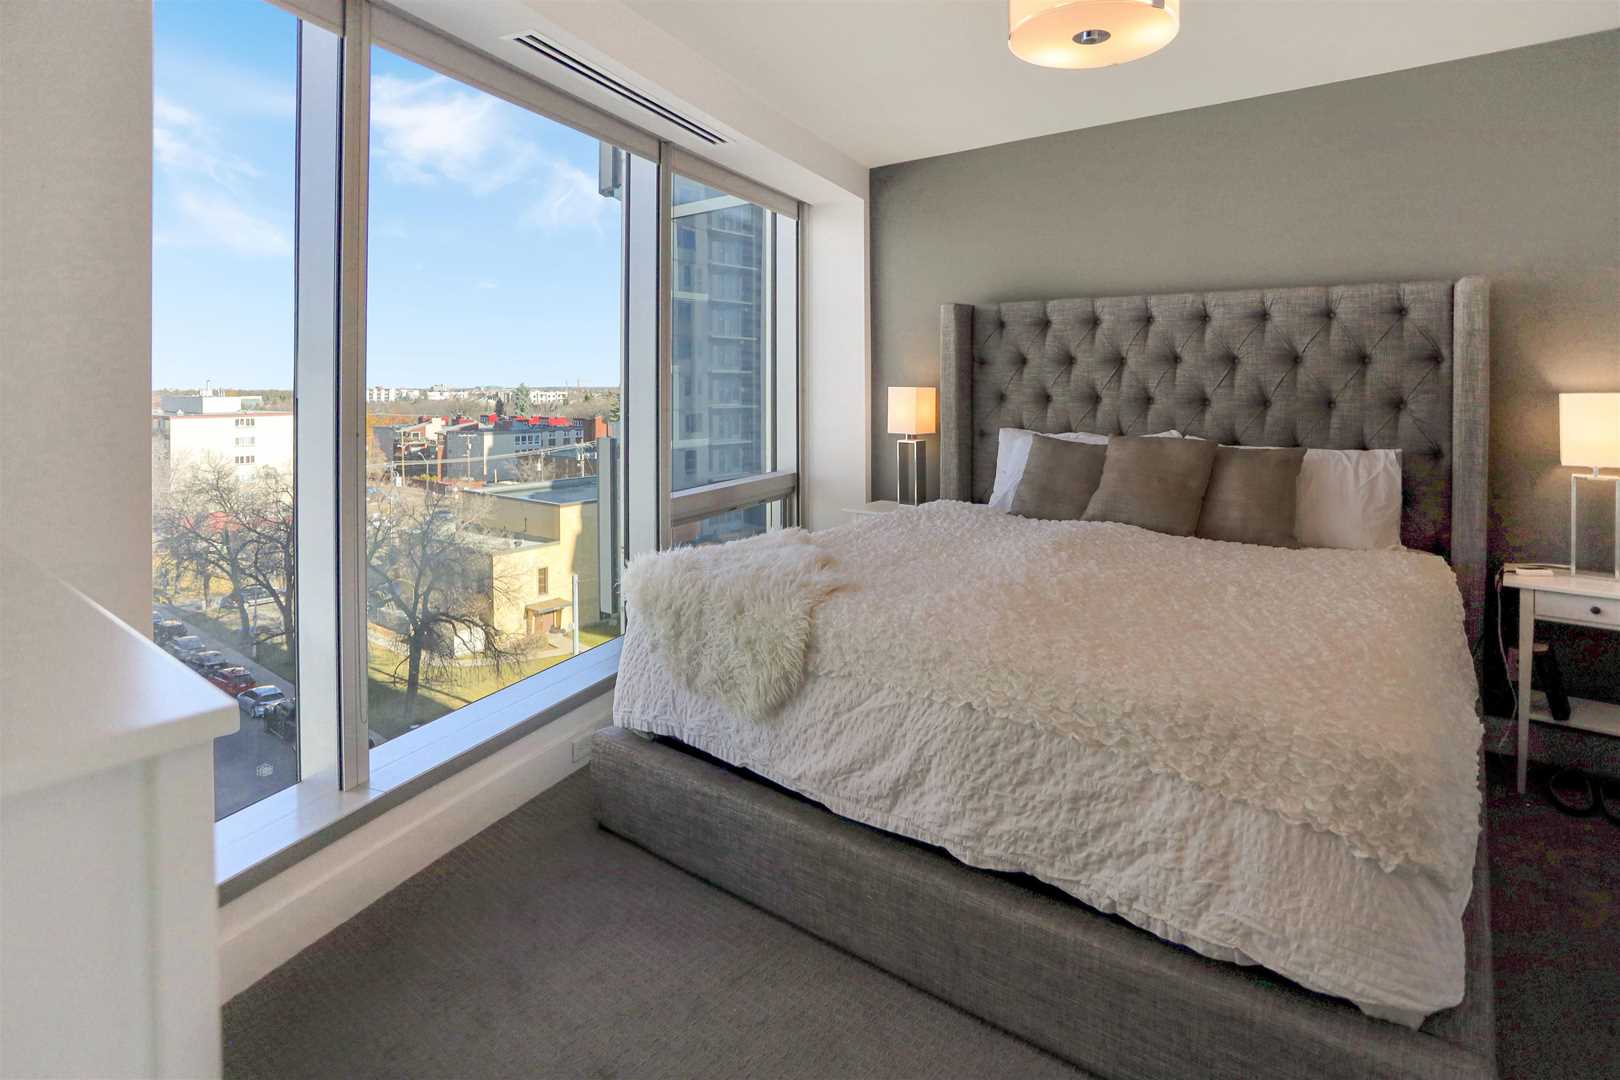 Interior condo bedroom, light grey floor, white ceiling and wall; grey frame bed with white comforter; large window to left